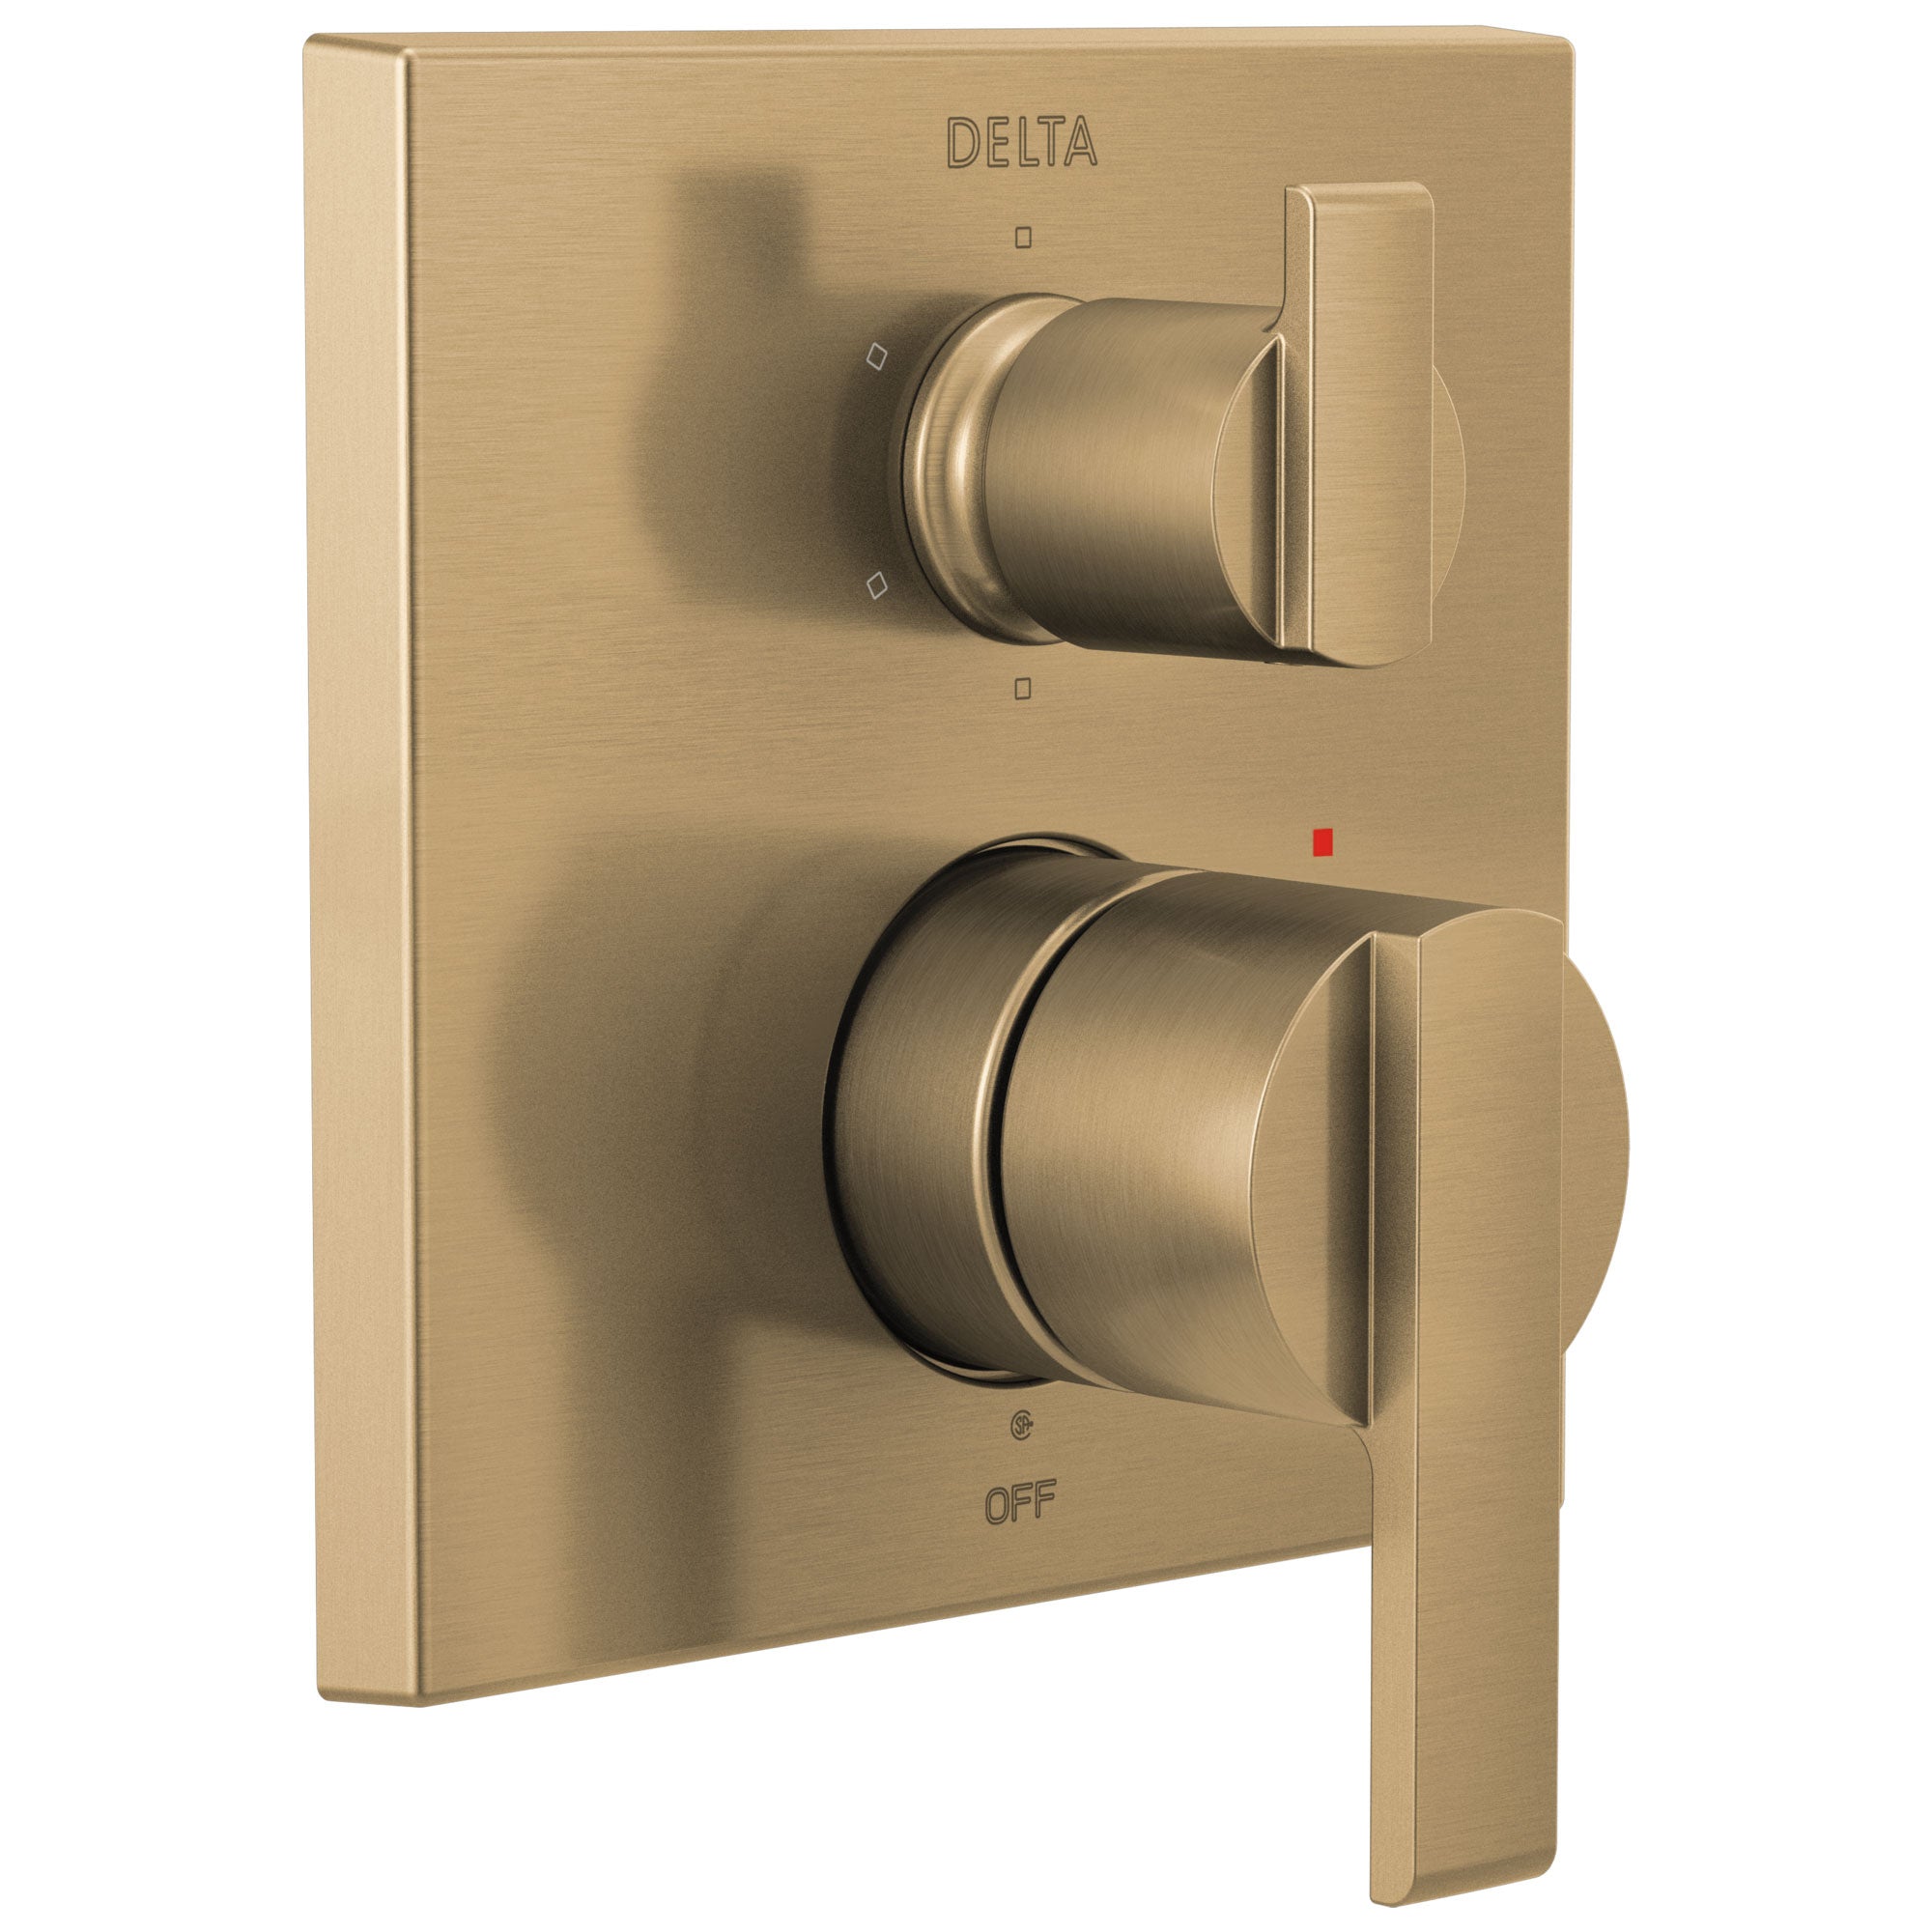 Delta Ara Champagne Bronze Finish Angular Modern 14 Series Shower System Control with 6-Setting Integrated Diverter Includes Valve and Handles D3184V